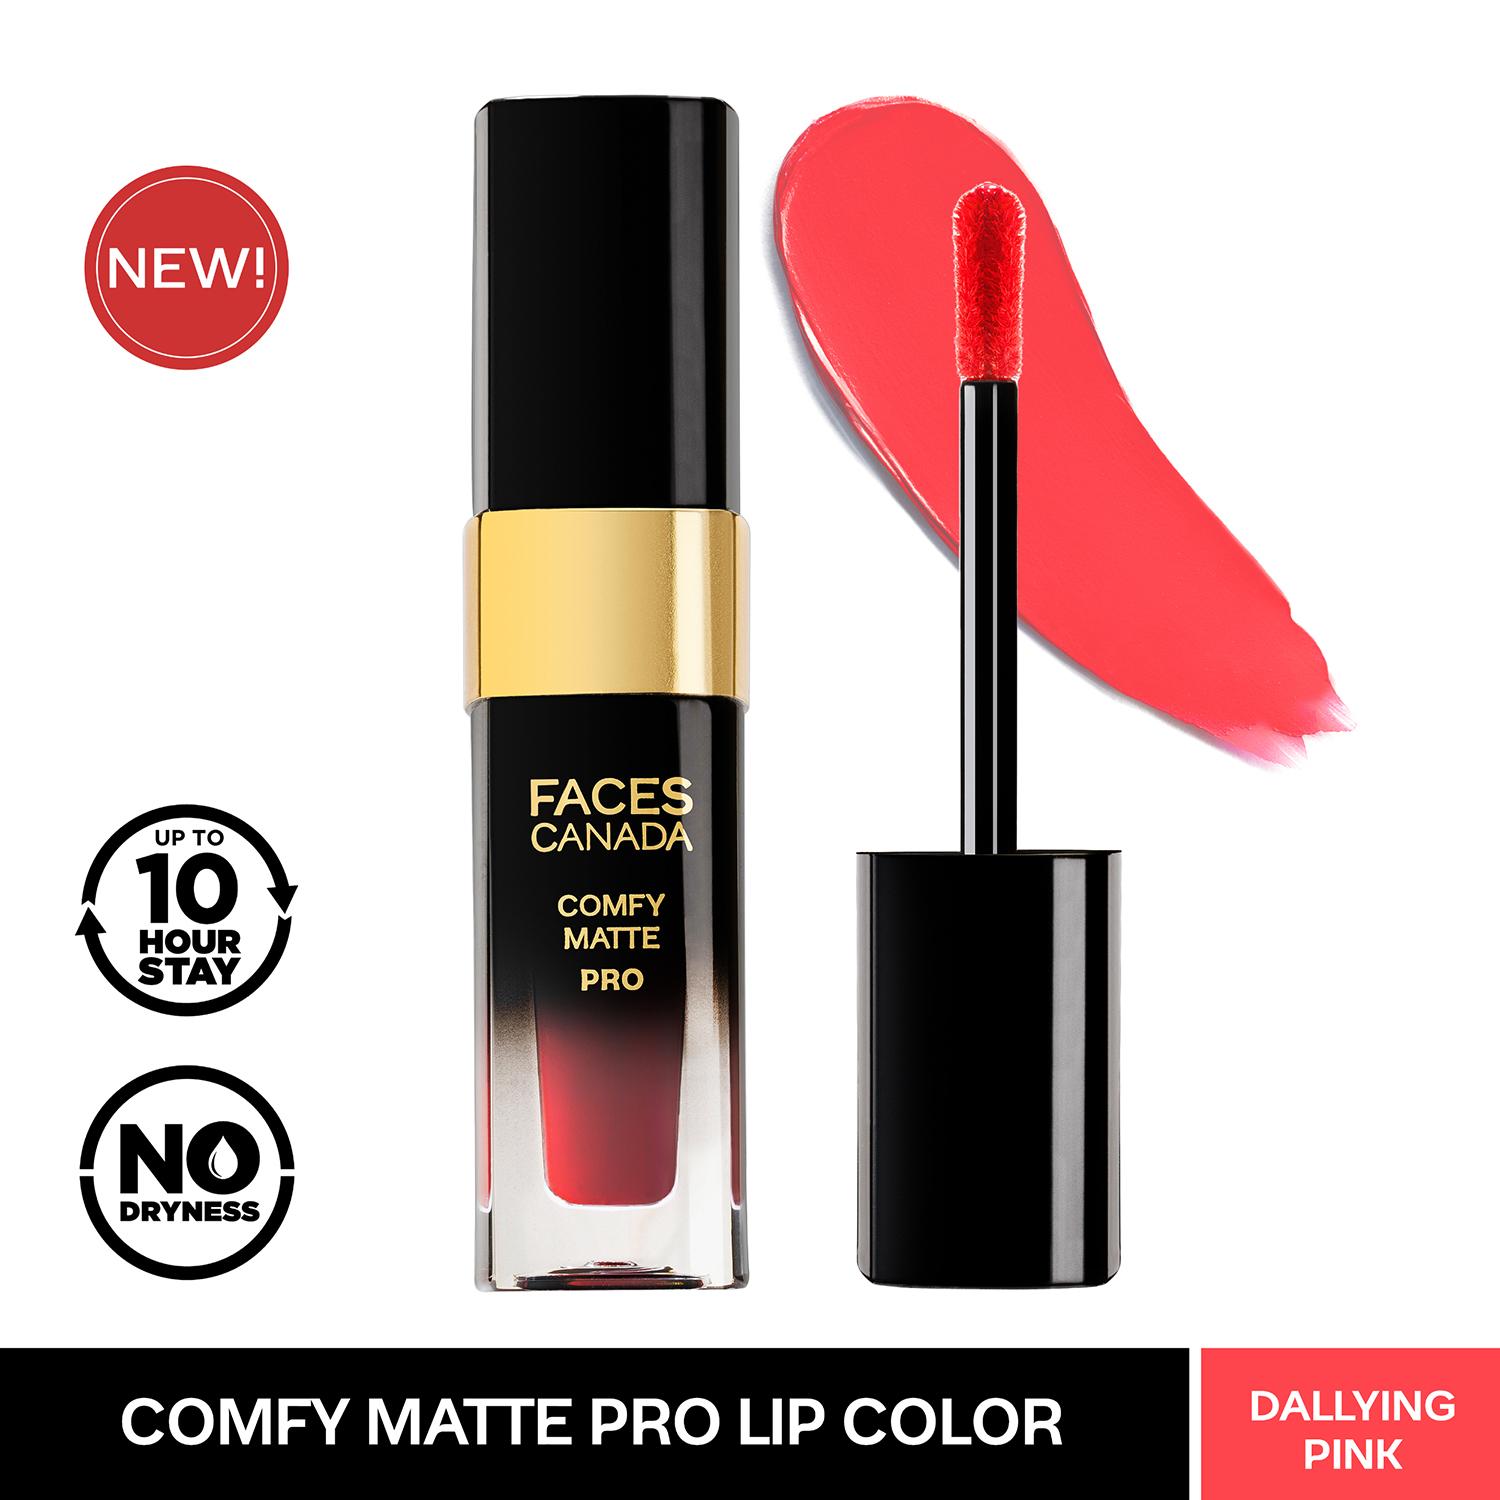 Faces Canada | Faces Canada Comfy Matte Pro Liquid Lipstick - Dallying Pink 12, 10HR Stay, No Dryness (5.5 ml)